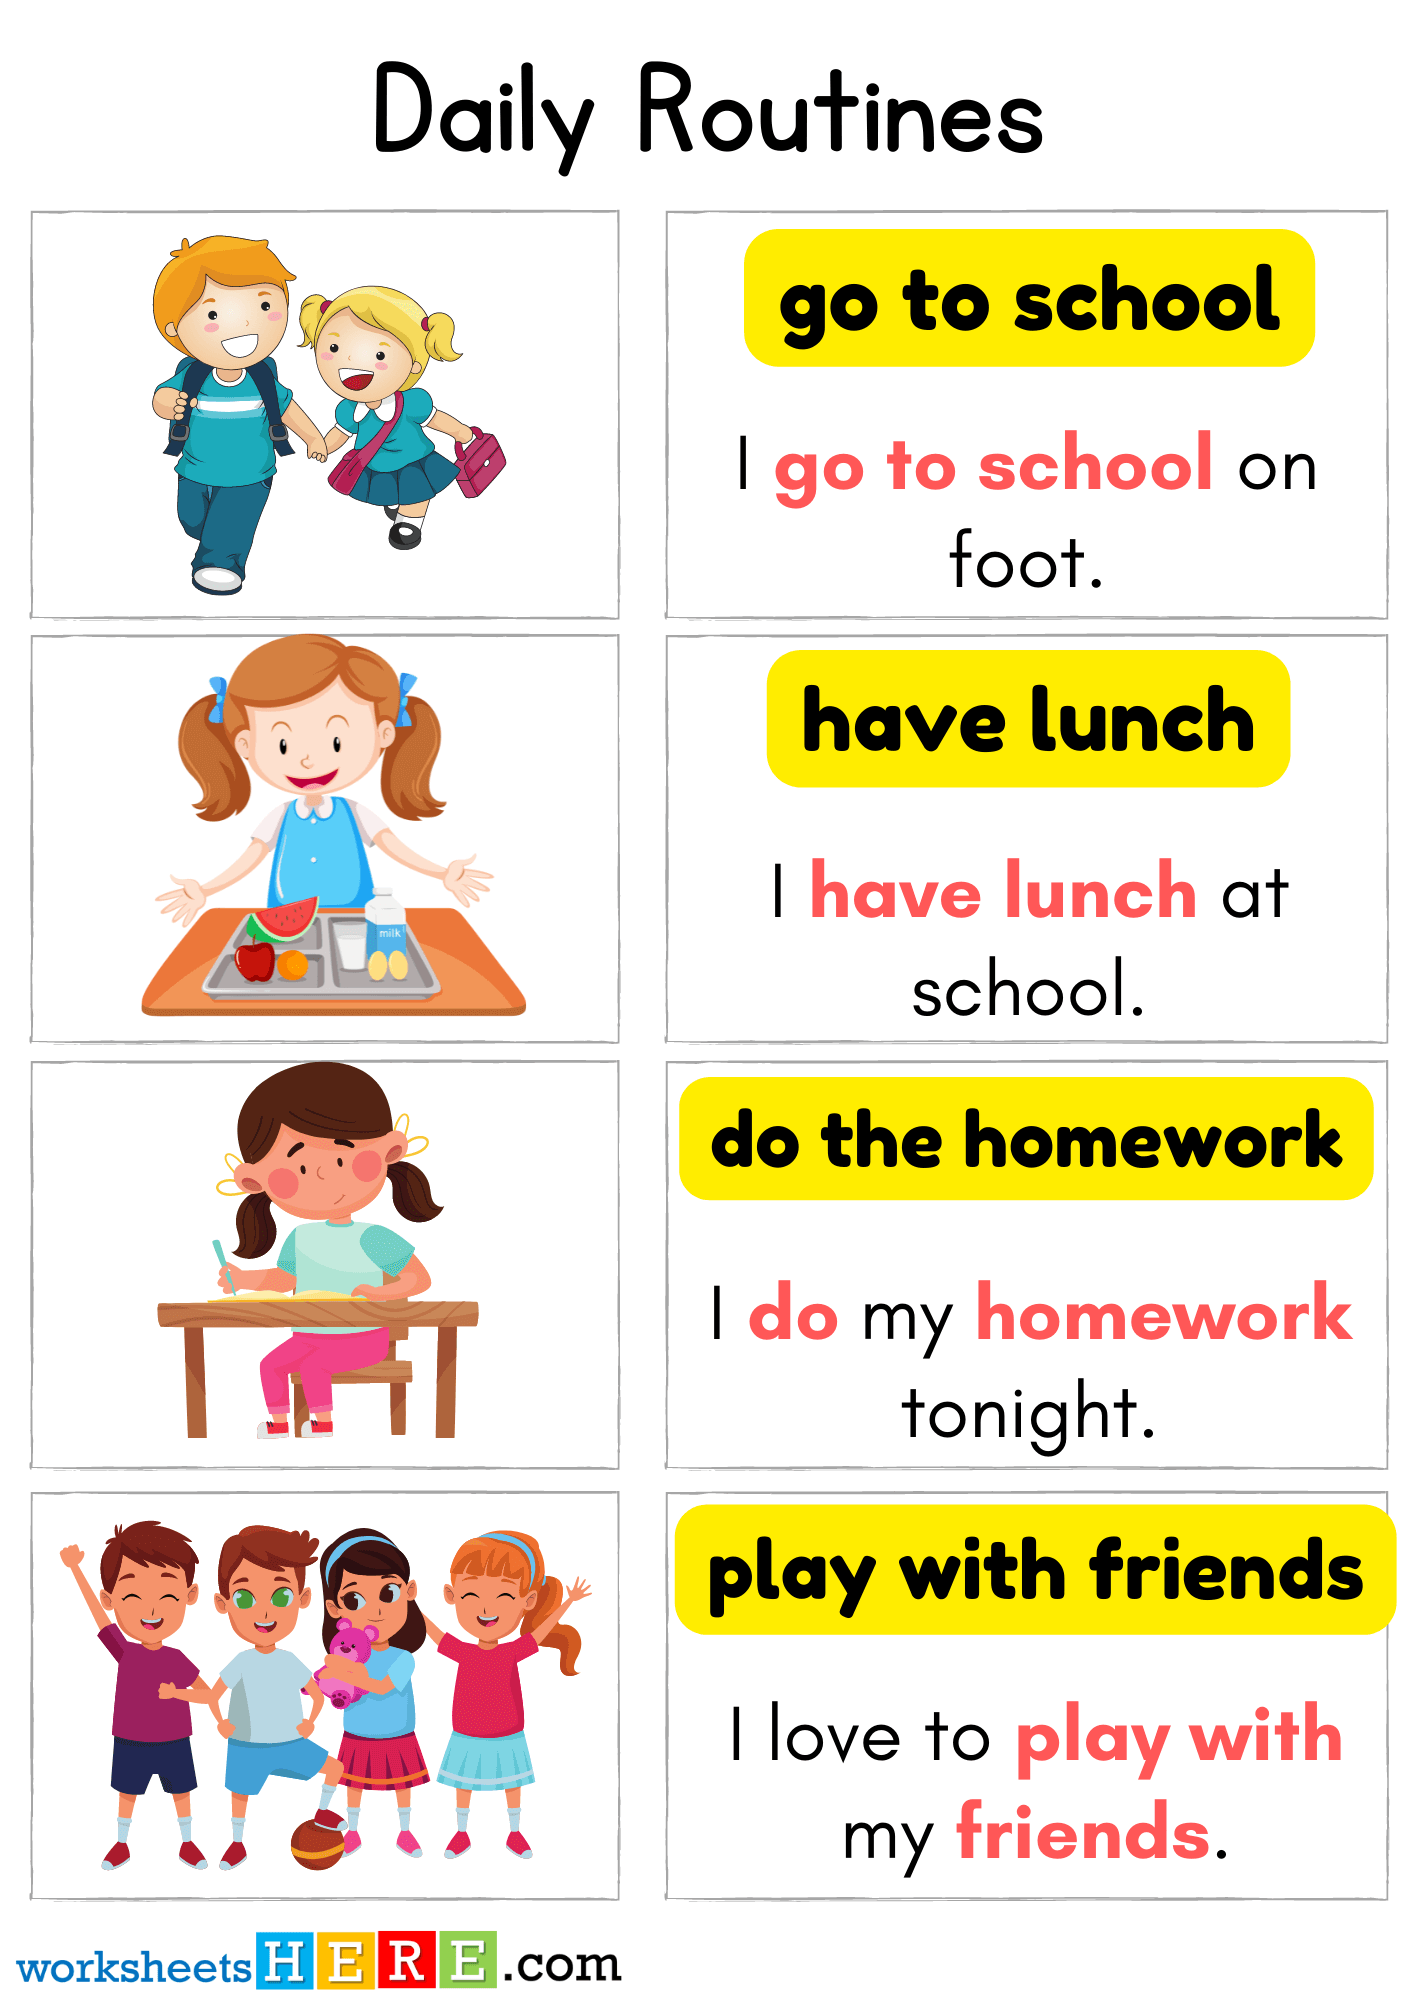 Daily Routines Words with Pictures and Sentences PDF Worksheet For Kids and Students